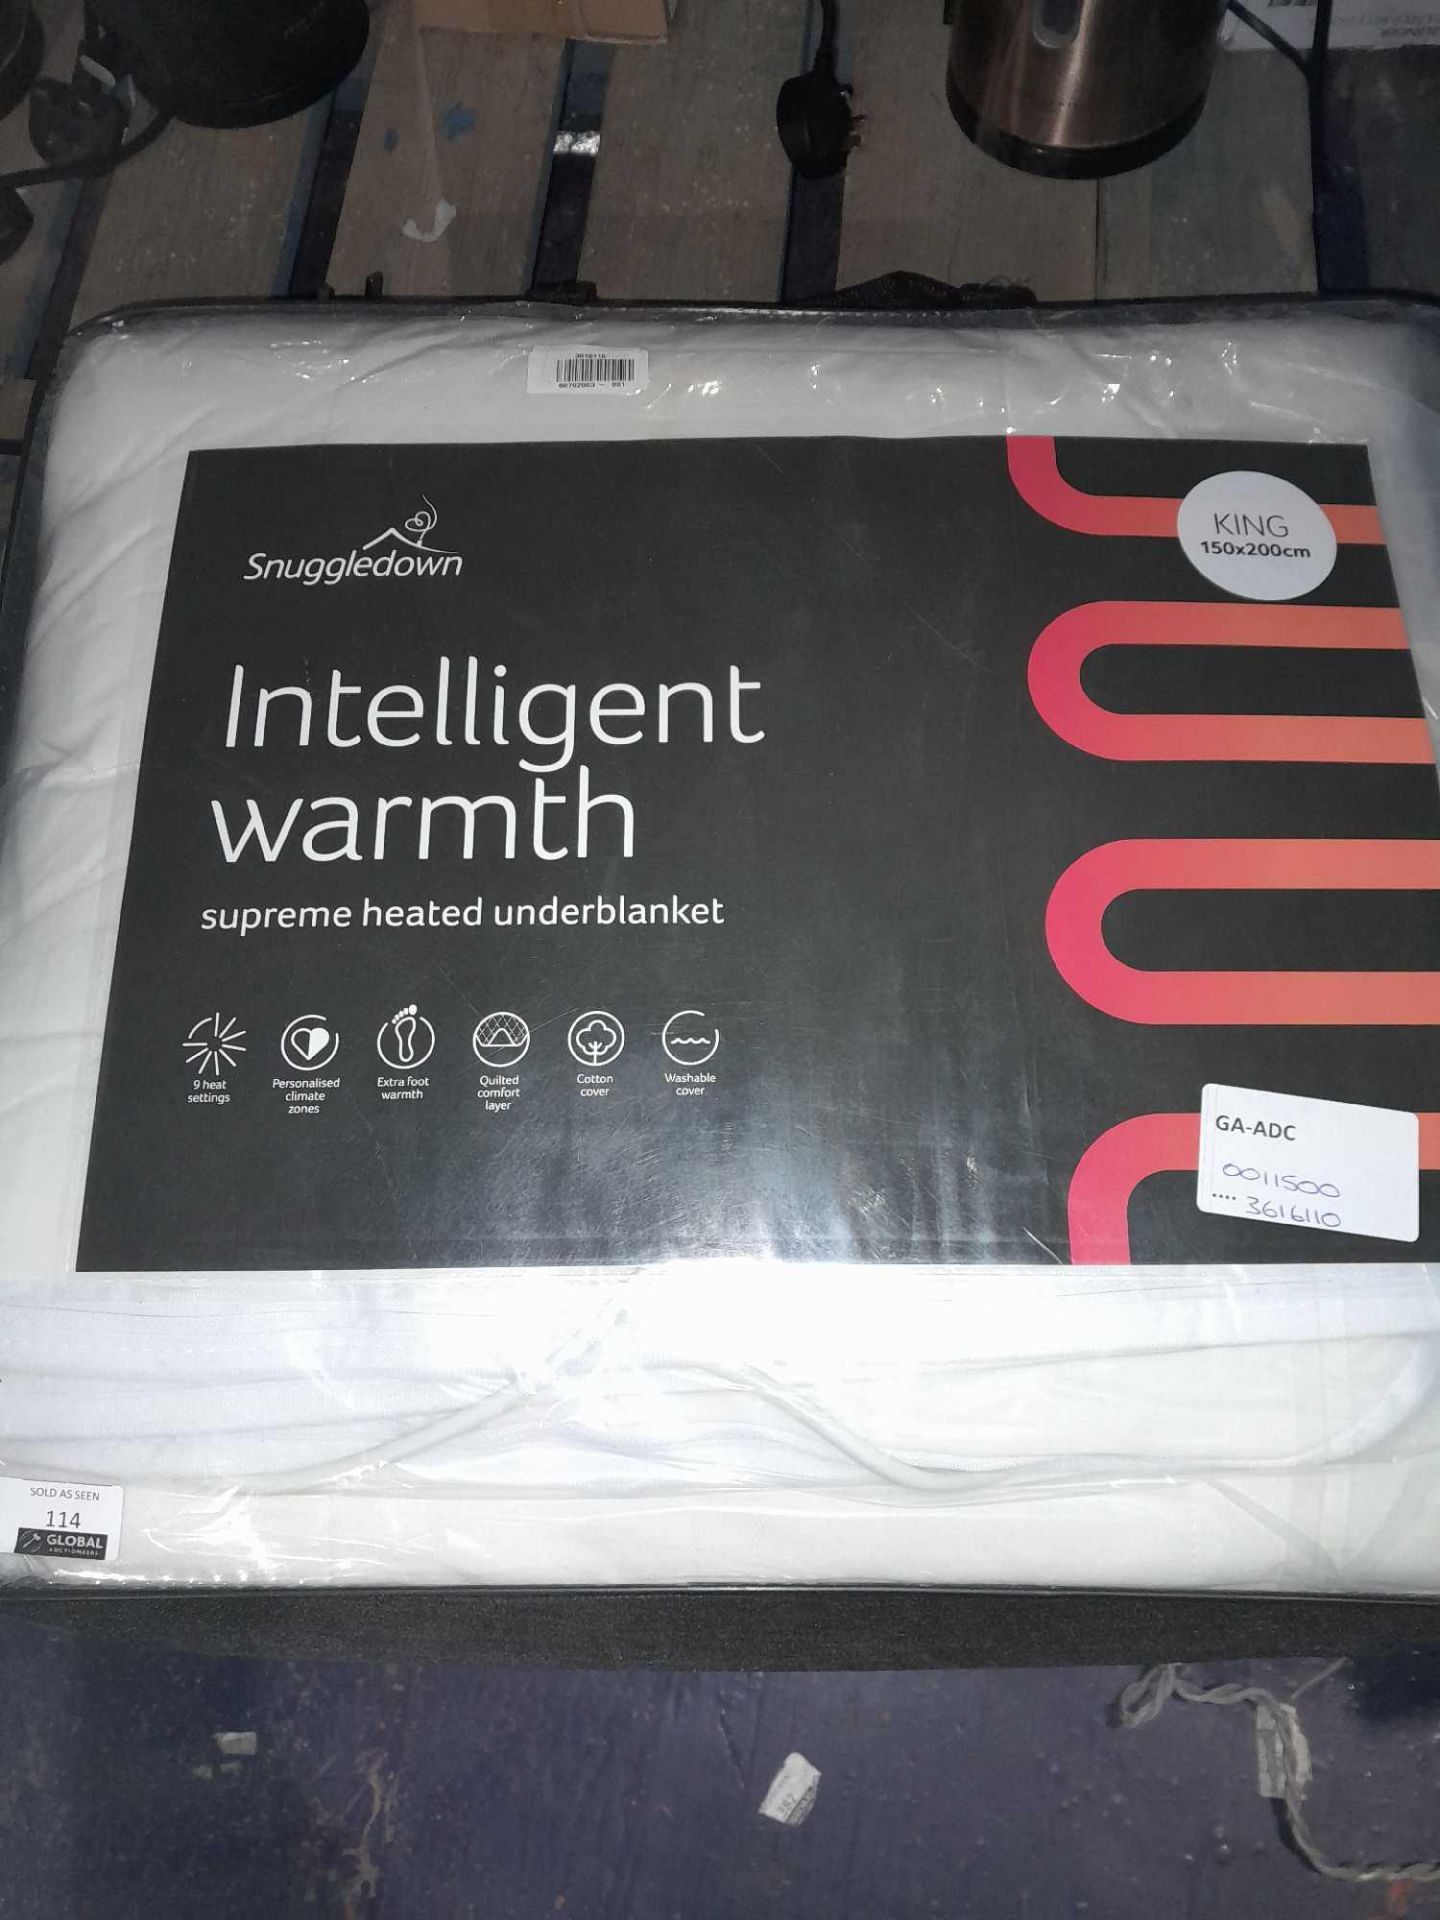 RRP £115 Snuggle down Intelligent Warmth Heated Under Blanket, King Size - Image 2 of 2